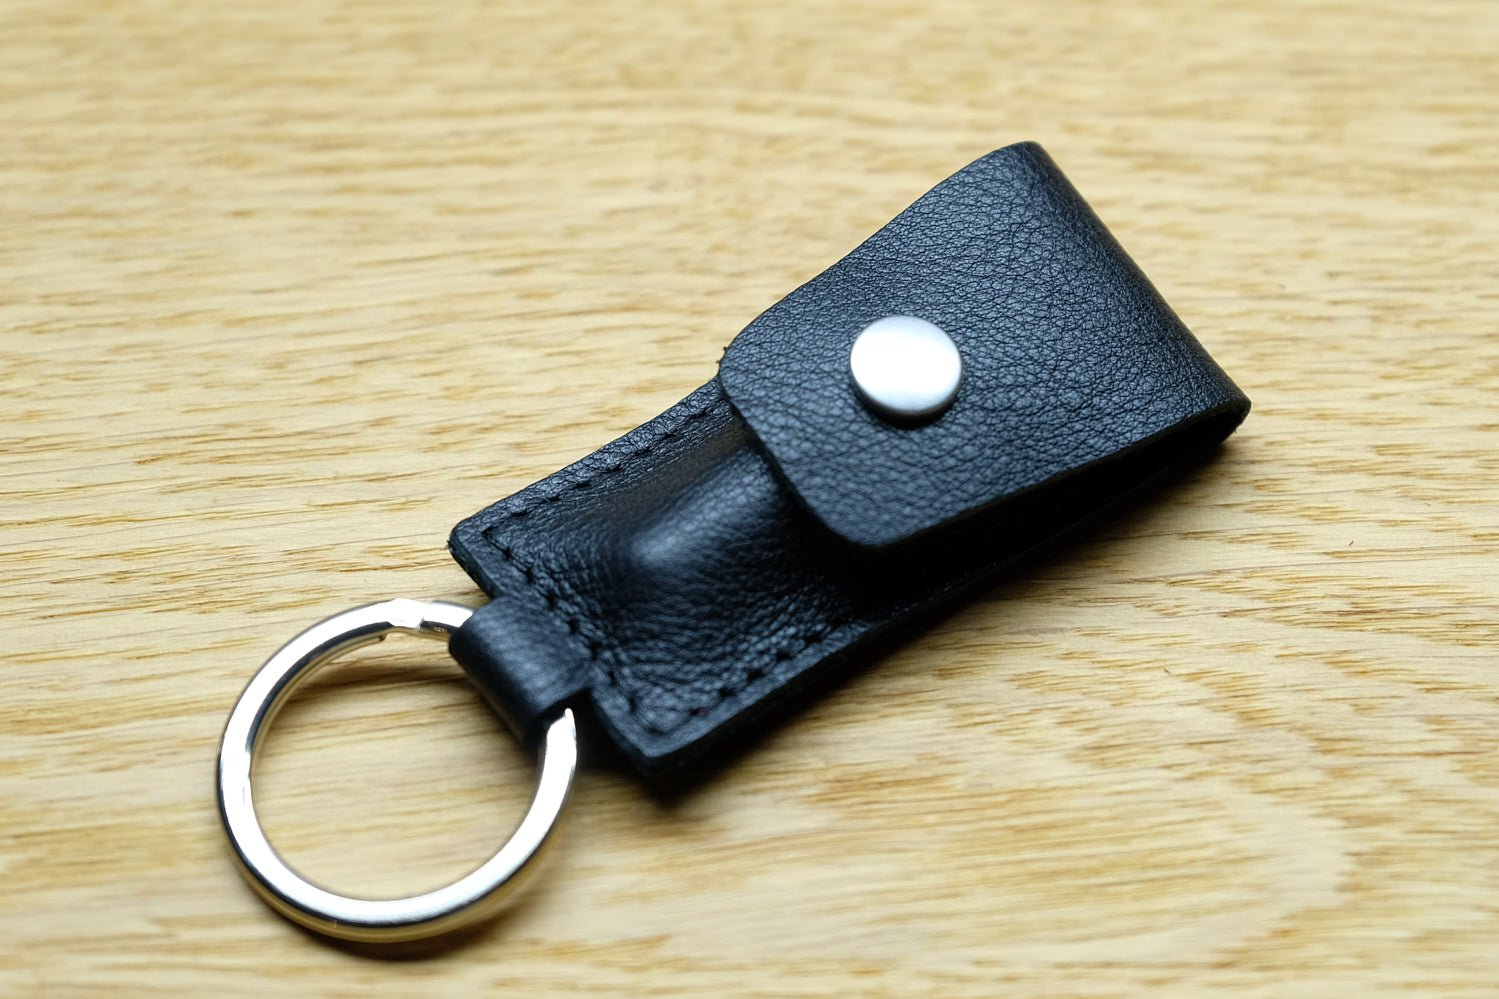 Spring bar tool black leather pouch - Atelier romane